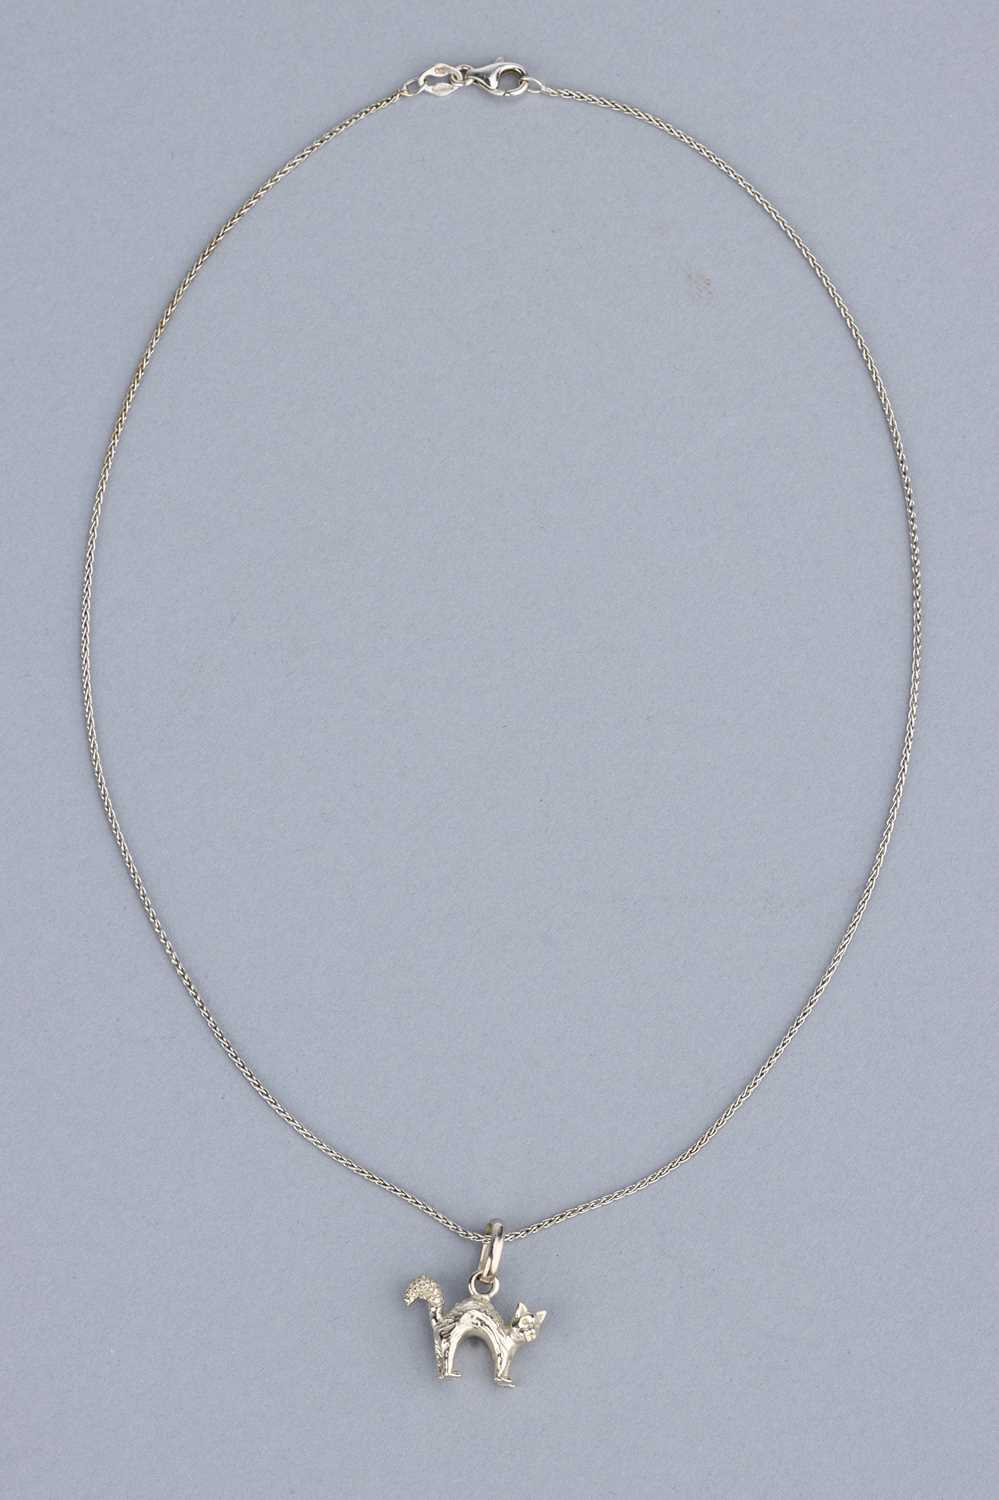 Lot 37 - 18 ct White Gold Rope-Link Chain